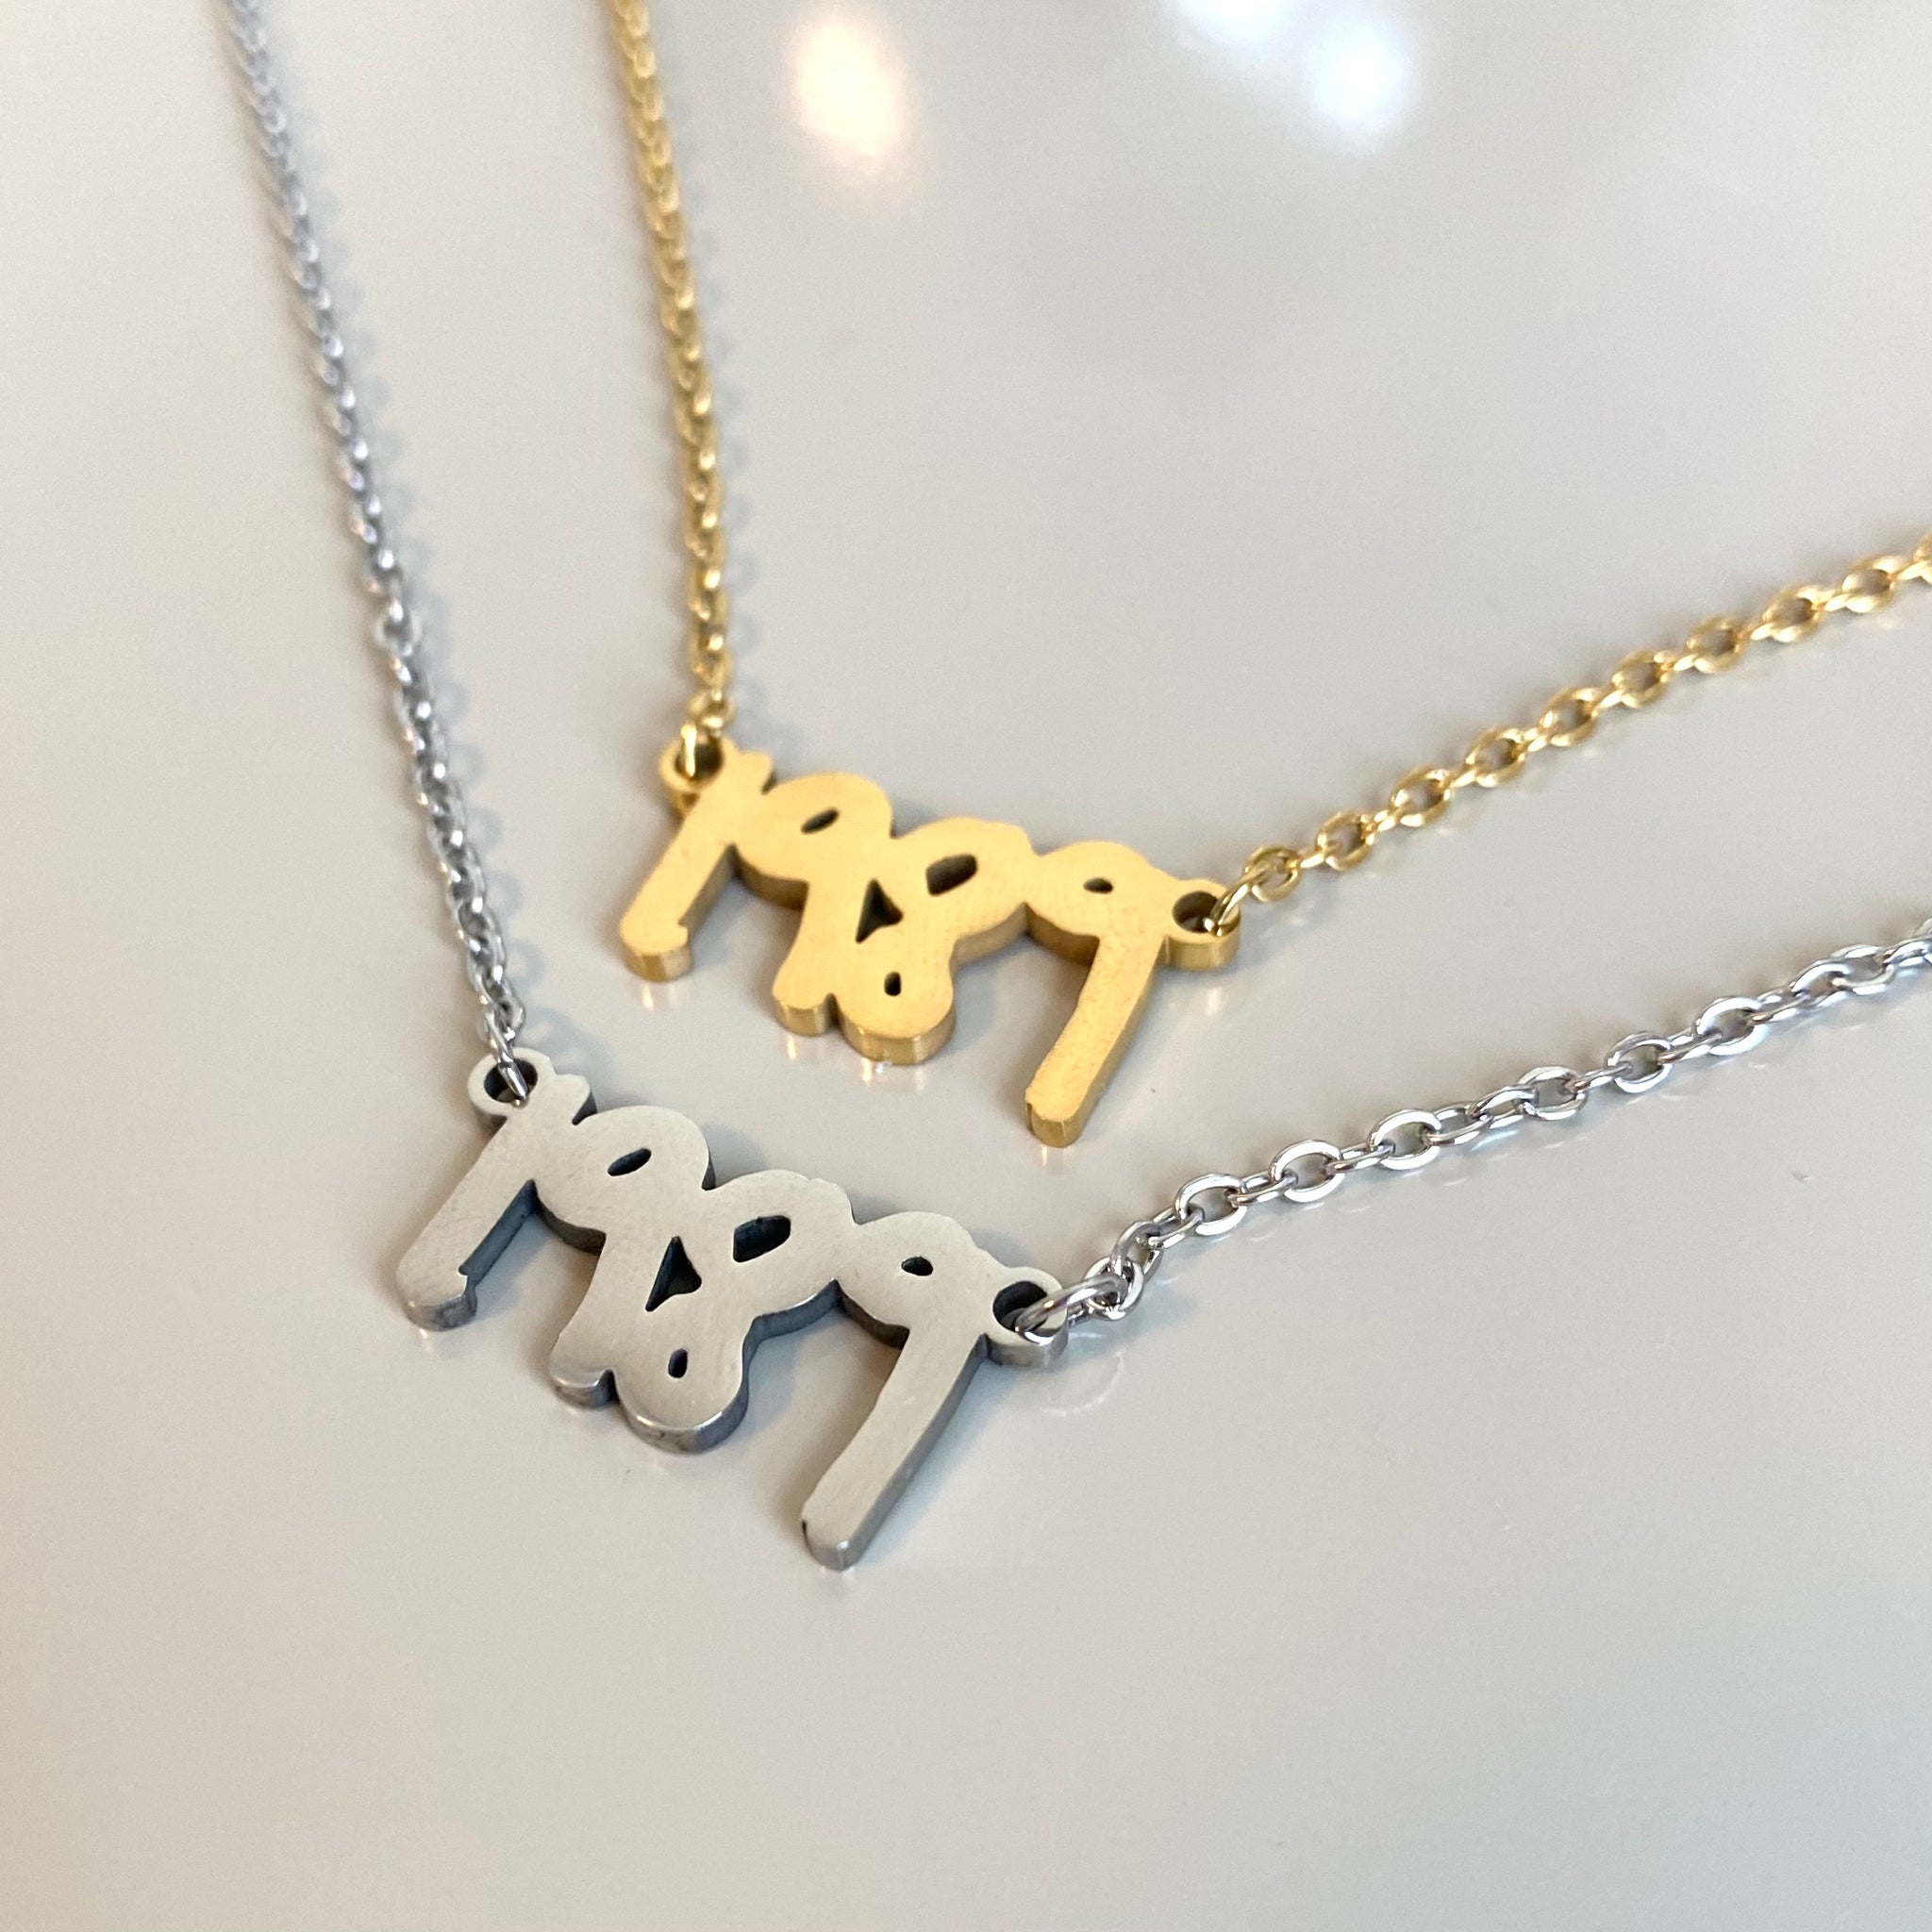 1989 Necklace